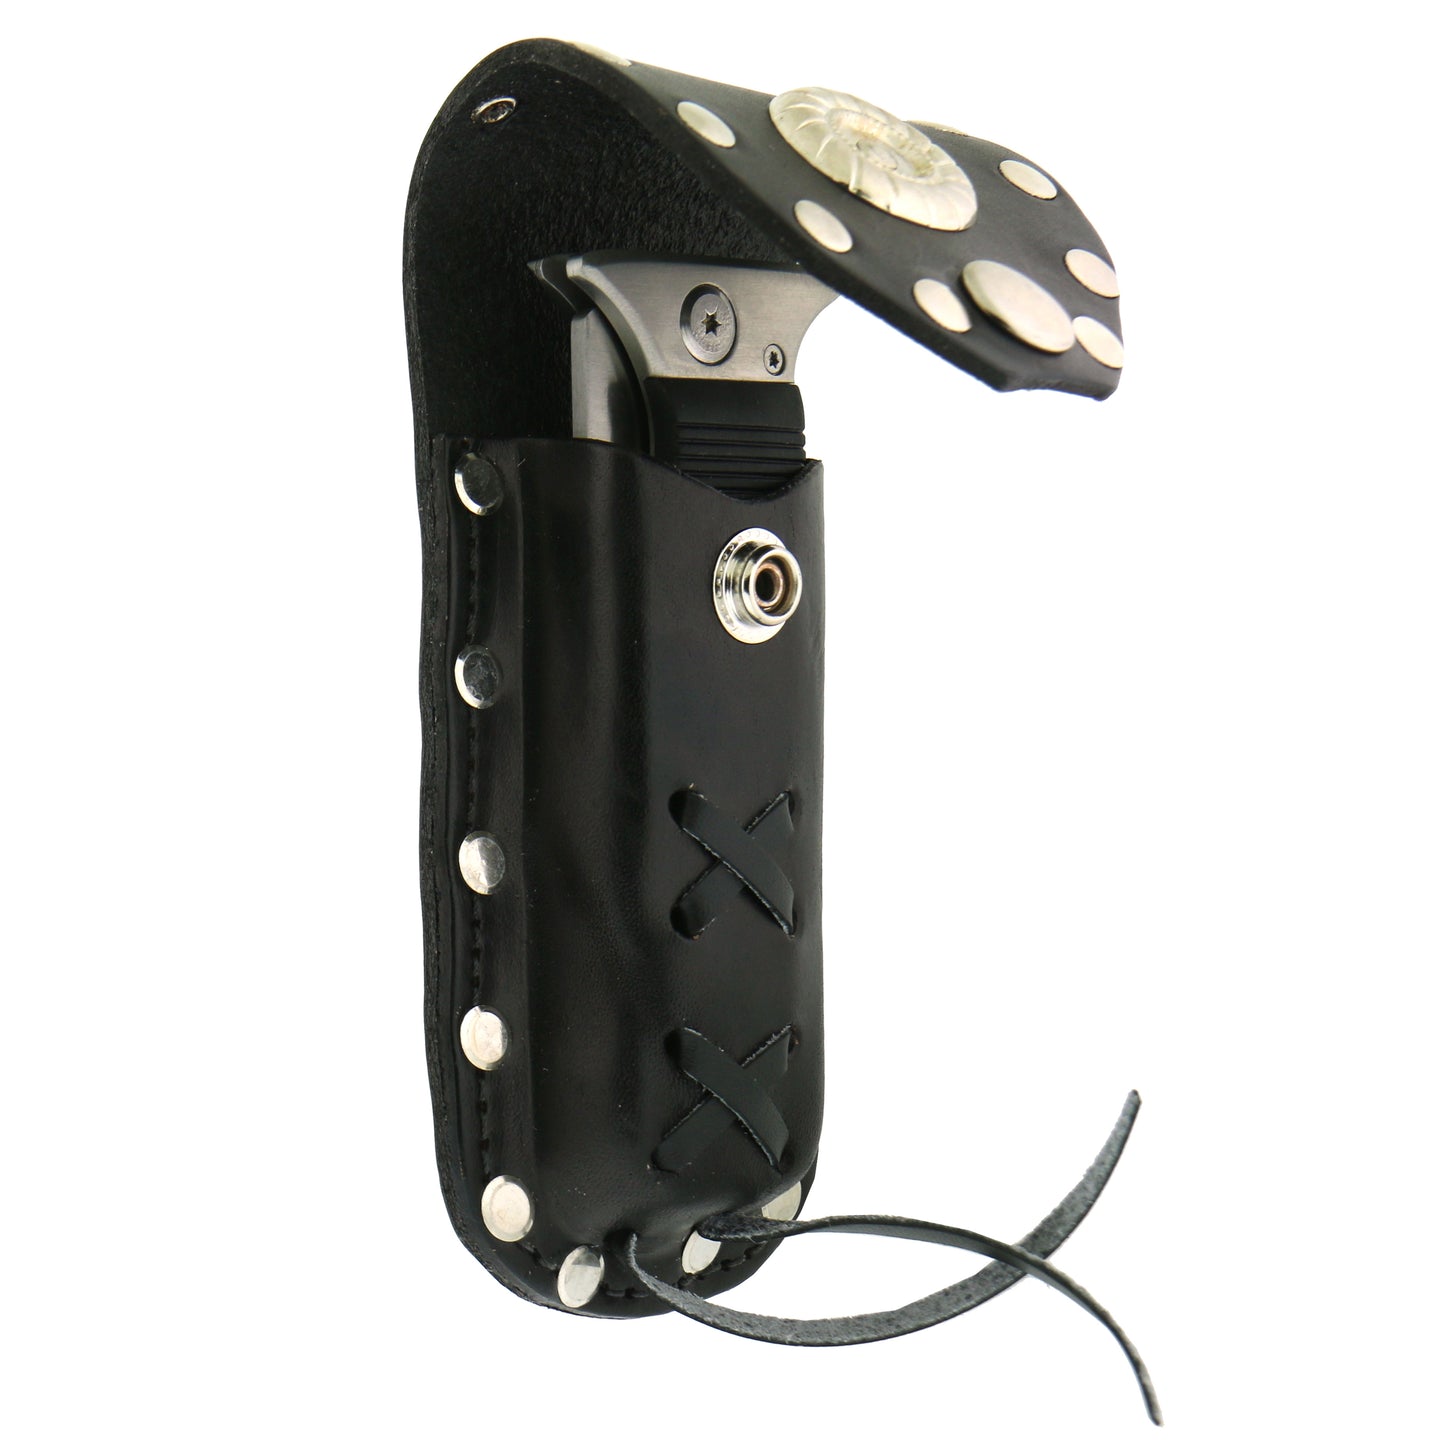 Hot Leathers CSF1001 Leather Knife Case with Rivets and Snap Closure